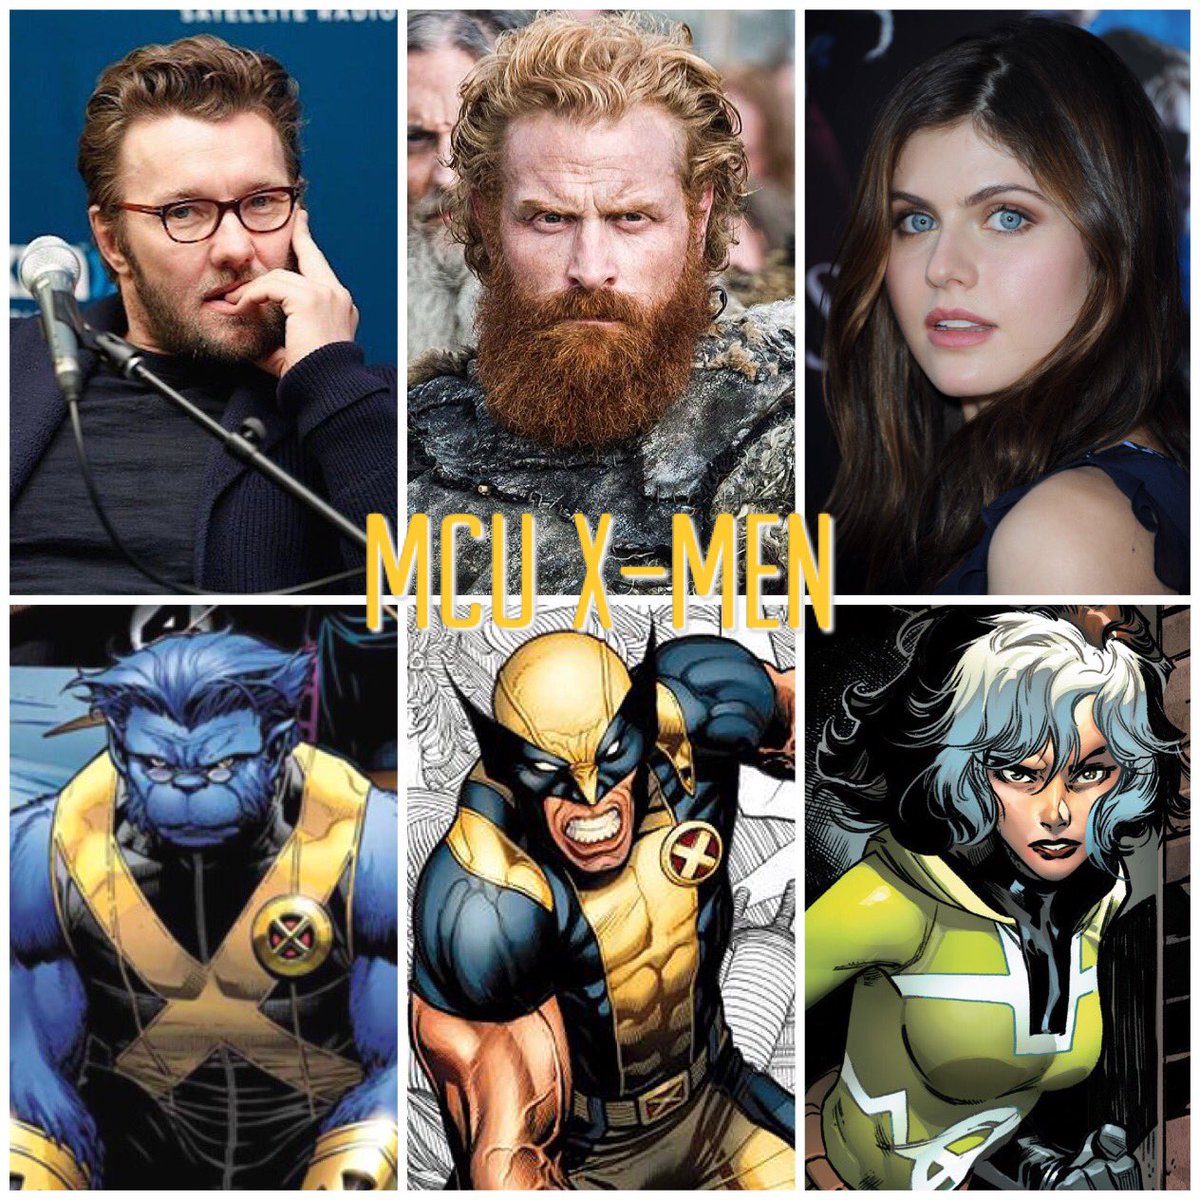 Roberto Duque I Was Fan Casting The Mcu X Men Instead Of Drawing This Morning Now My Productivity Has To Be At An All Time High Xmen T Co Vuxnmia5ox